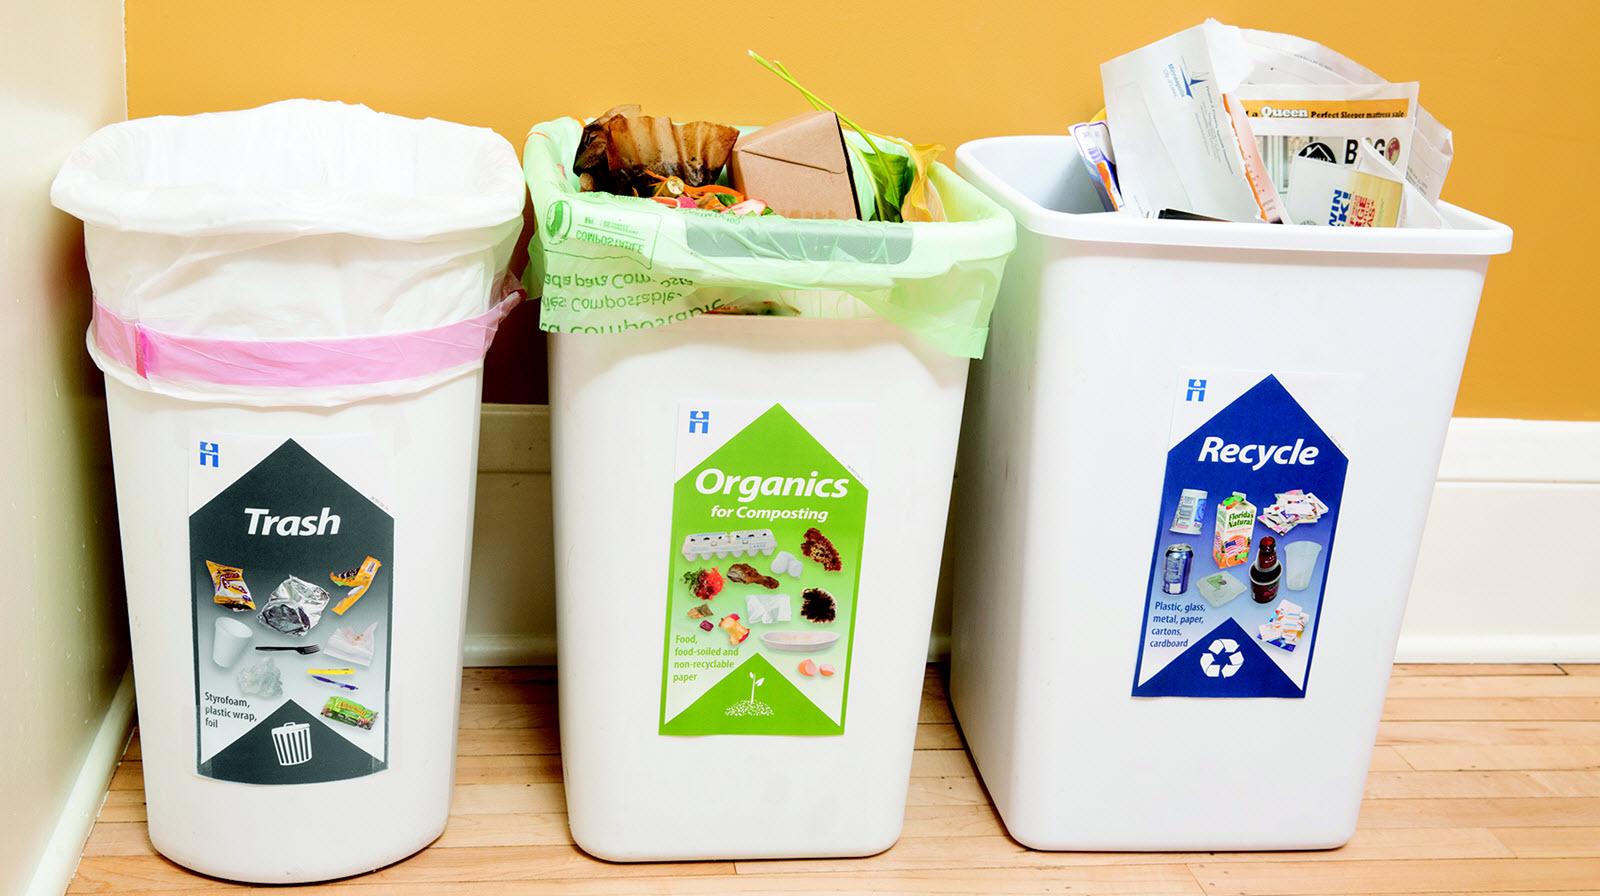 Bins with recycle, organics and trash labels